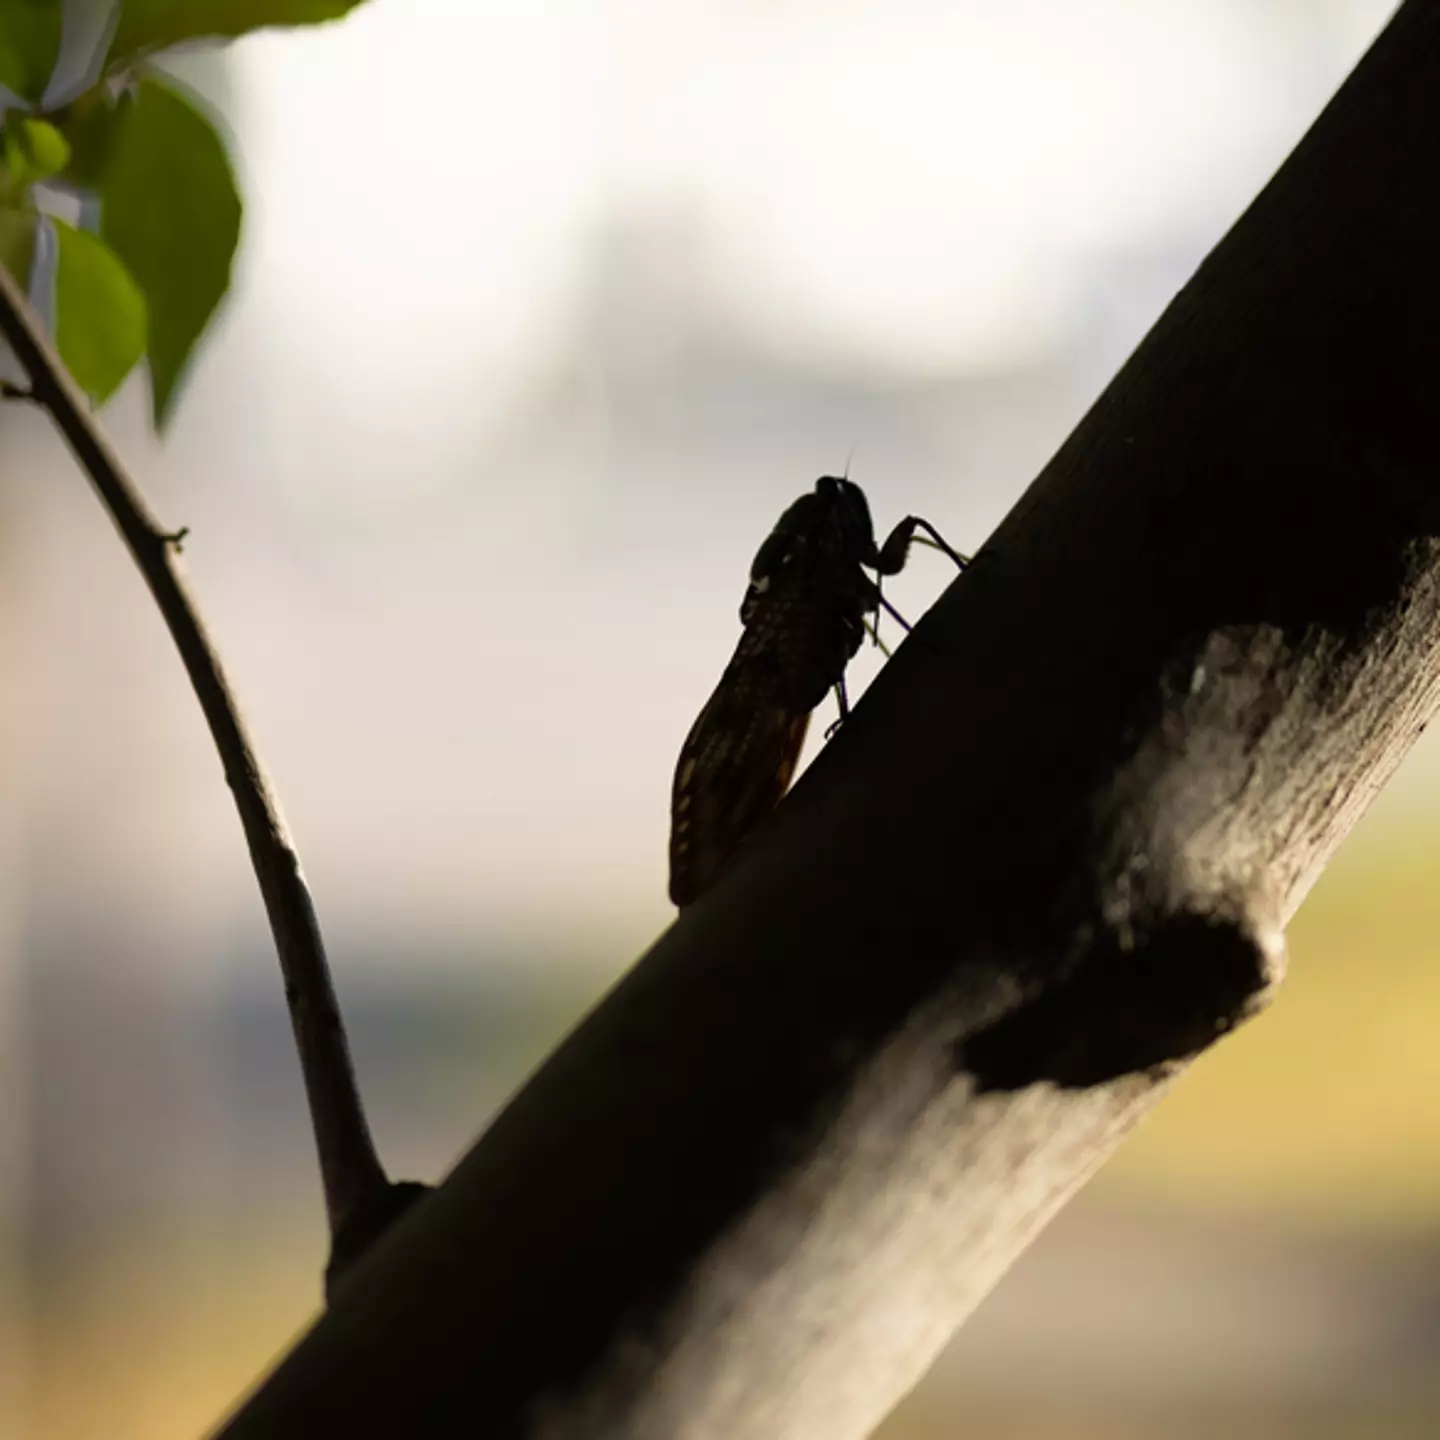 'Biggest bug invasion in centuries' in the US - but what's causing it?